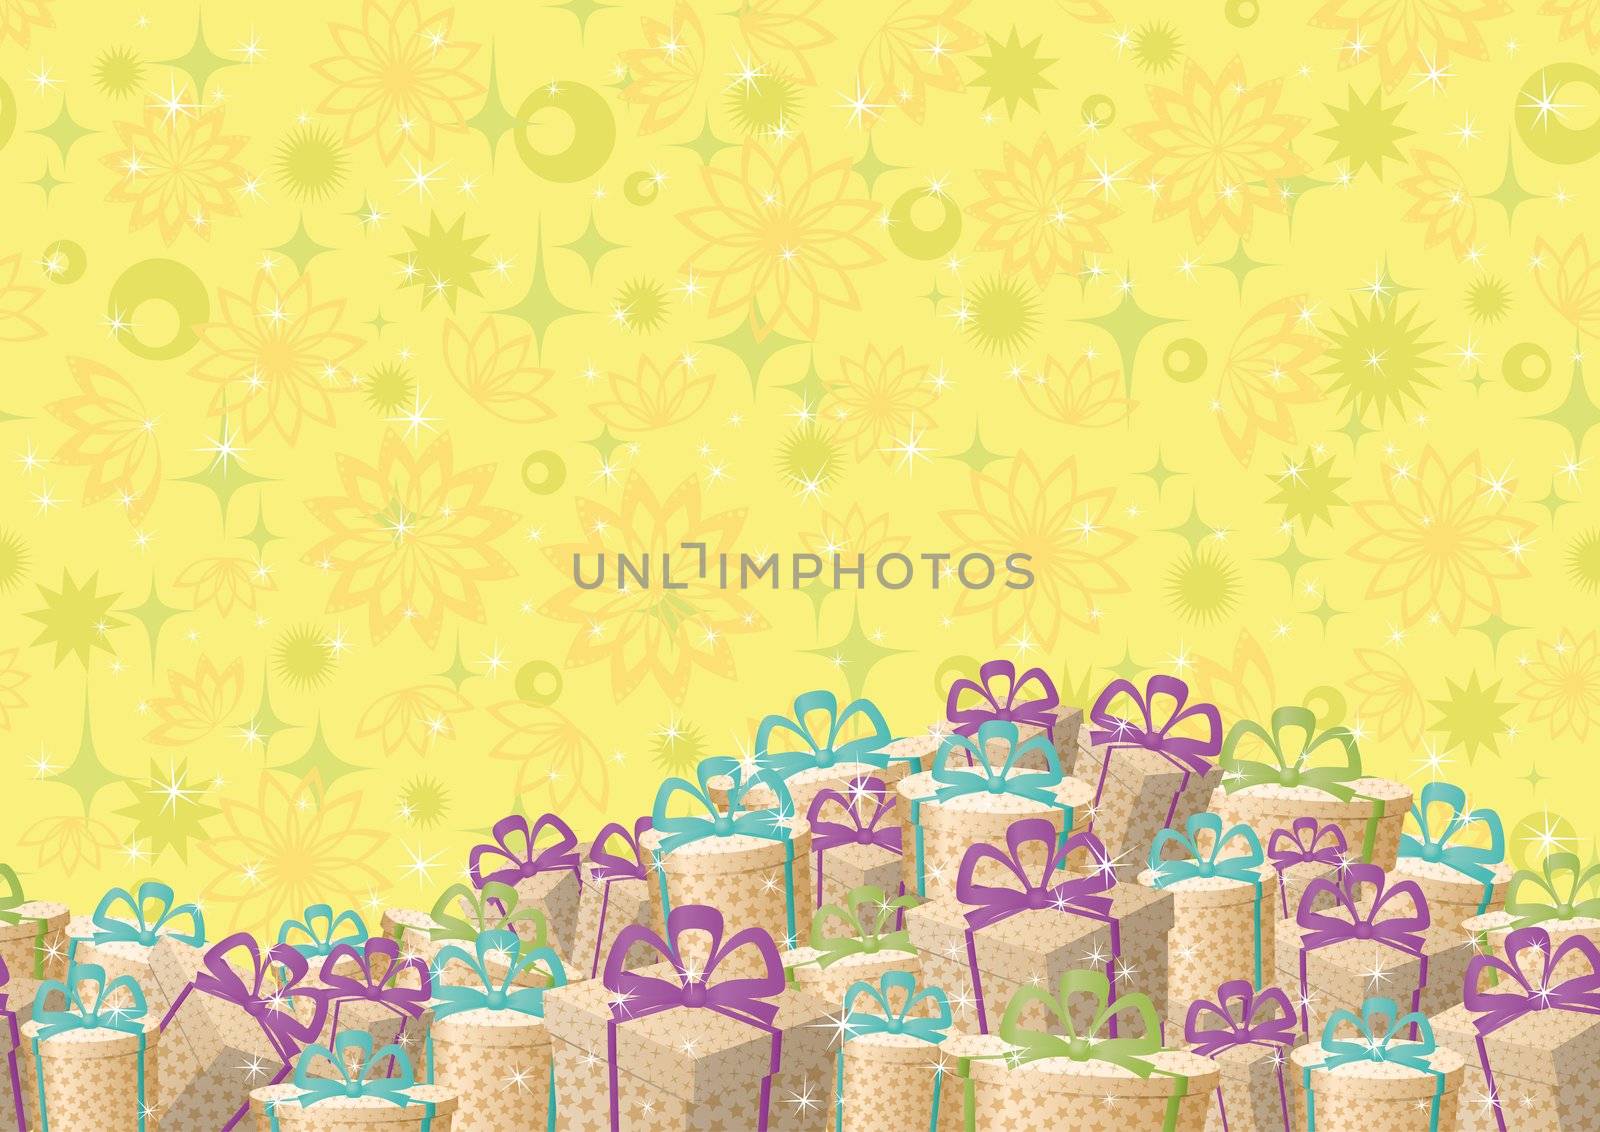 Holiday gift boxes, background by alexcoolok